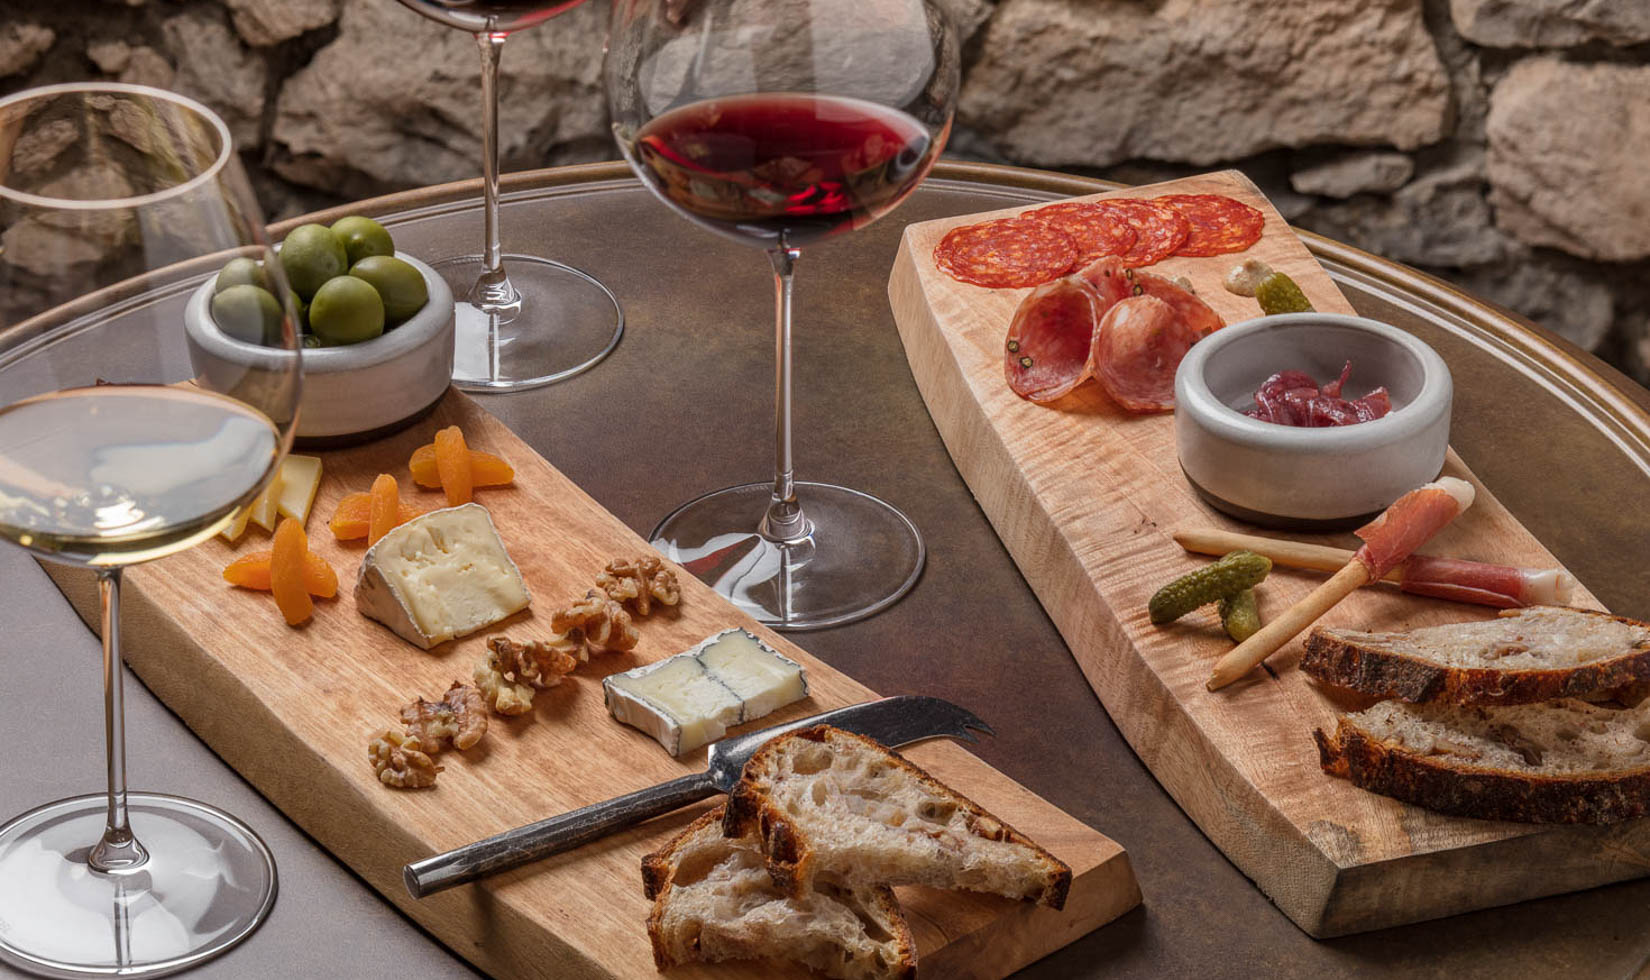 Pangloss Winery cheese boards with wine glasses